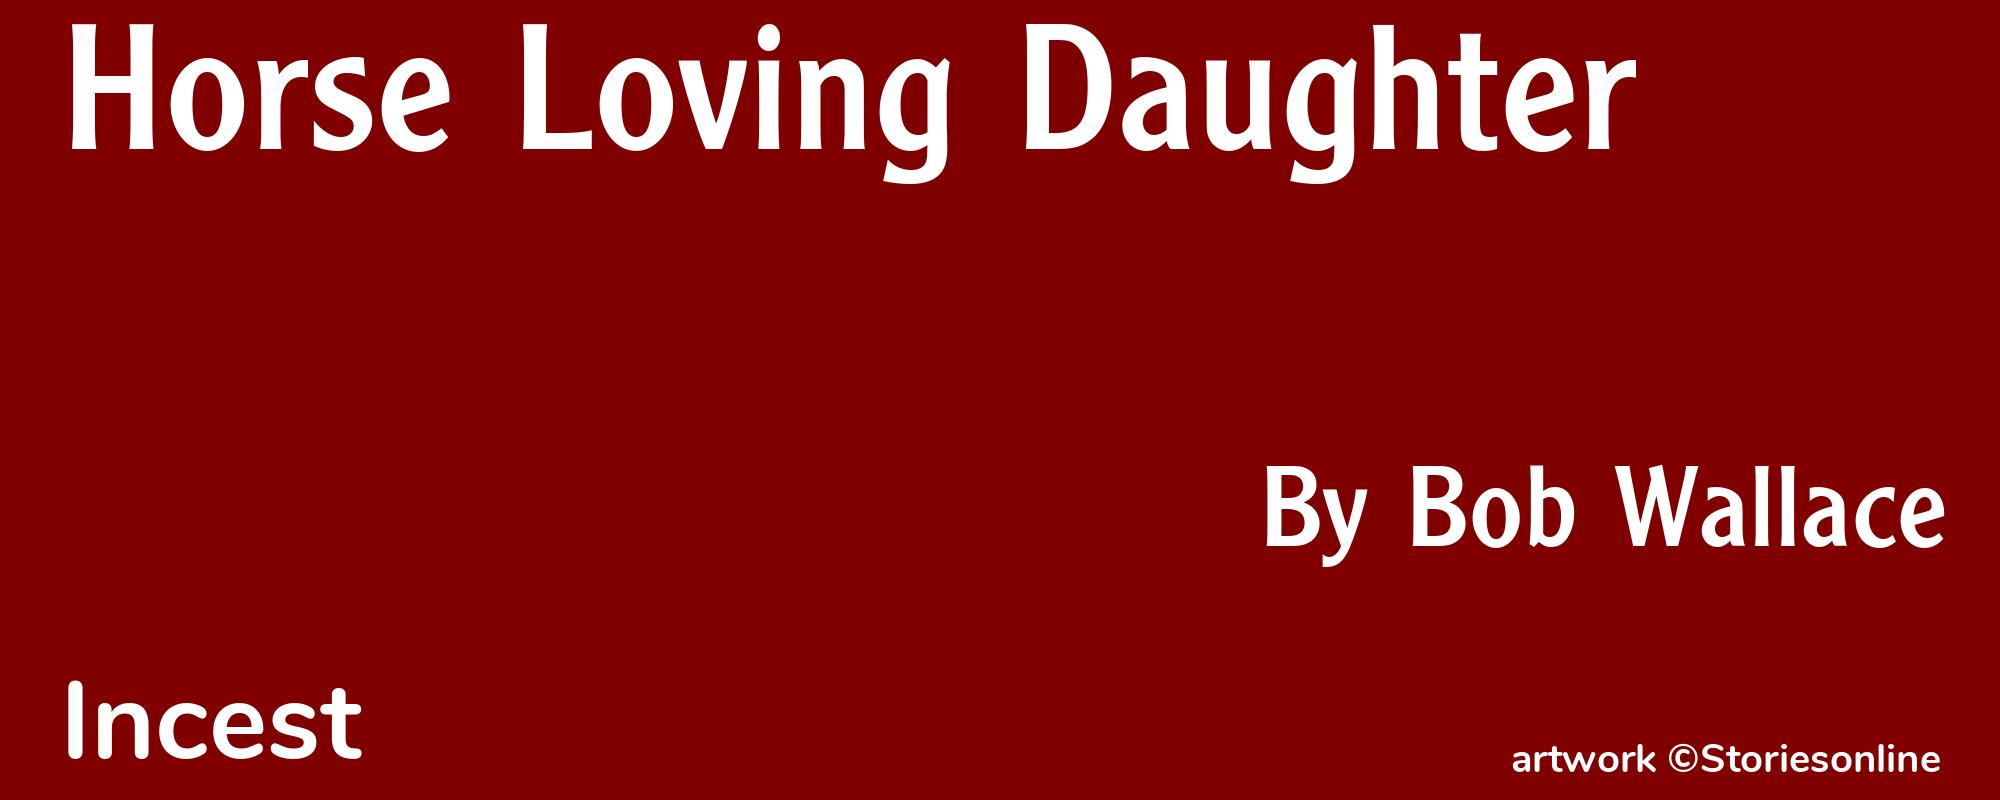 Horse Loving Daughter - Cover